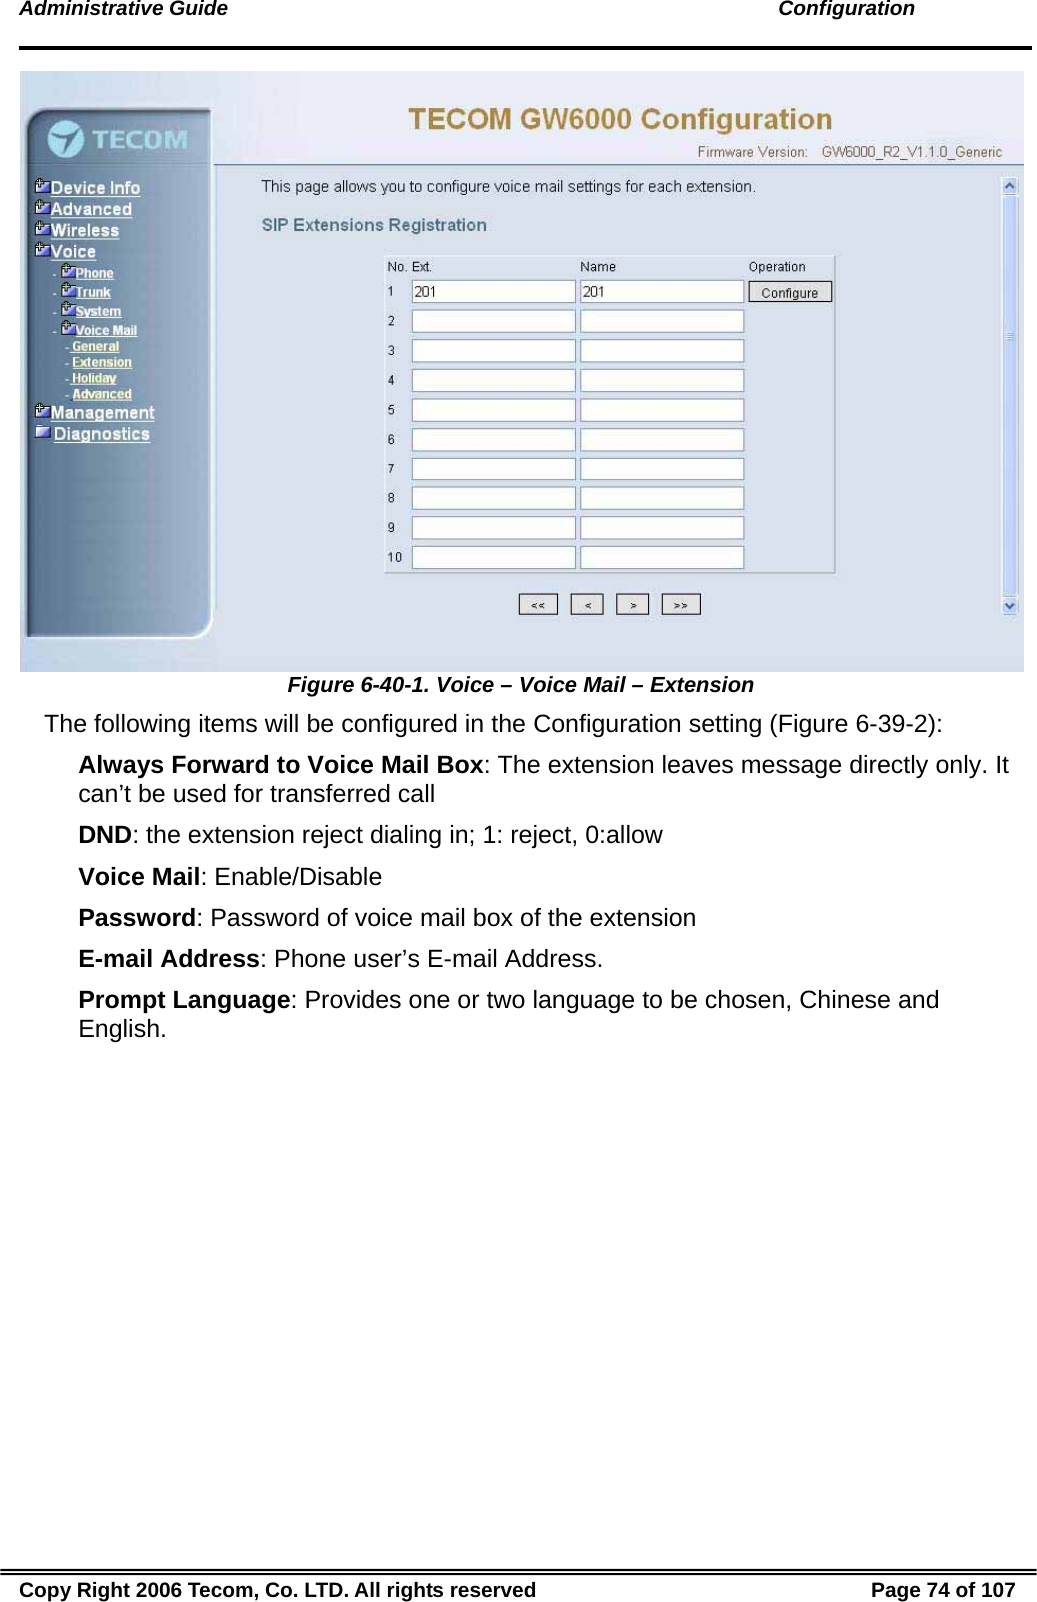 Administrative Guide                                                                                               Configuration  Figure 6-40-1. Voice – Voice Mail – Extension The following items will be configured in the Configuration setting (Figure 6-39-2): Always Forward to Voice Mail Box: The extension leaves message directly only. It can’t be used for transferred call DND: the extension reject dialing in; 1: reject, 0:allow Voice Mail: Enable/Disable Password: Password of voice mail box of the extension E-mail Address: Phone user’s E-mail Address. Prompt Language: Provides one or two language to be chosen, Chinese and English. Copy Right 2006 Tecom, Co. LTD. All rights reserved  Page 74 of 107 